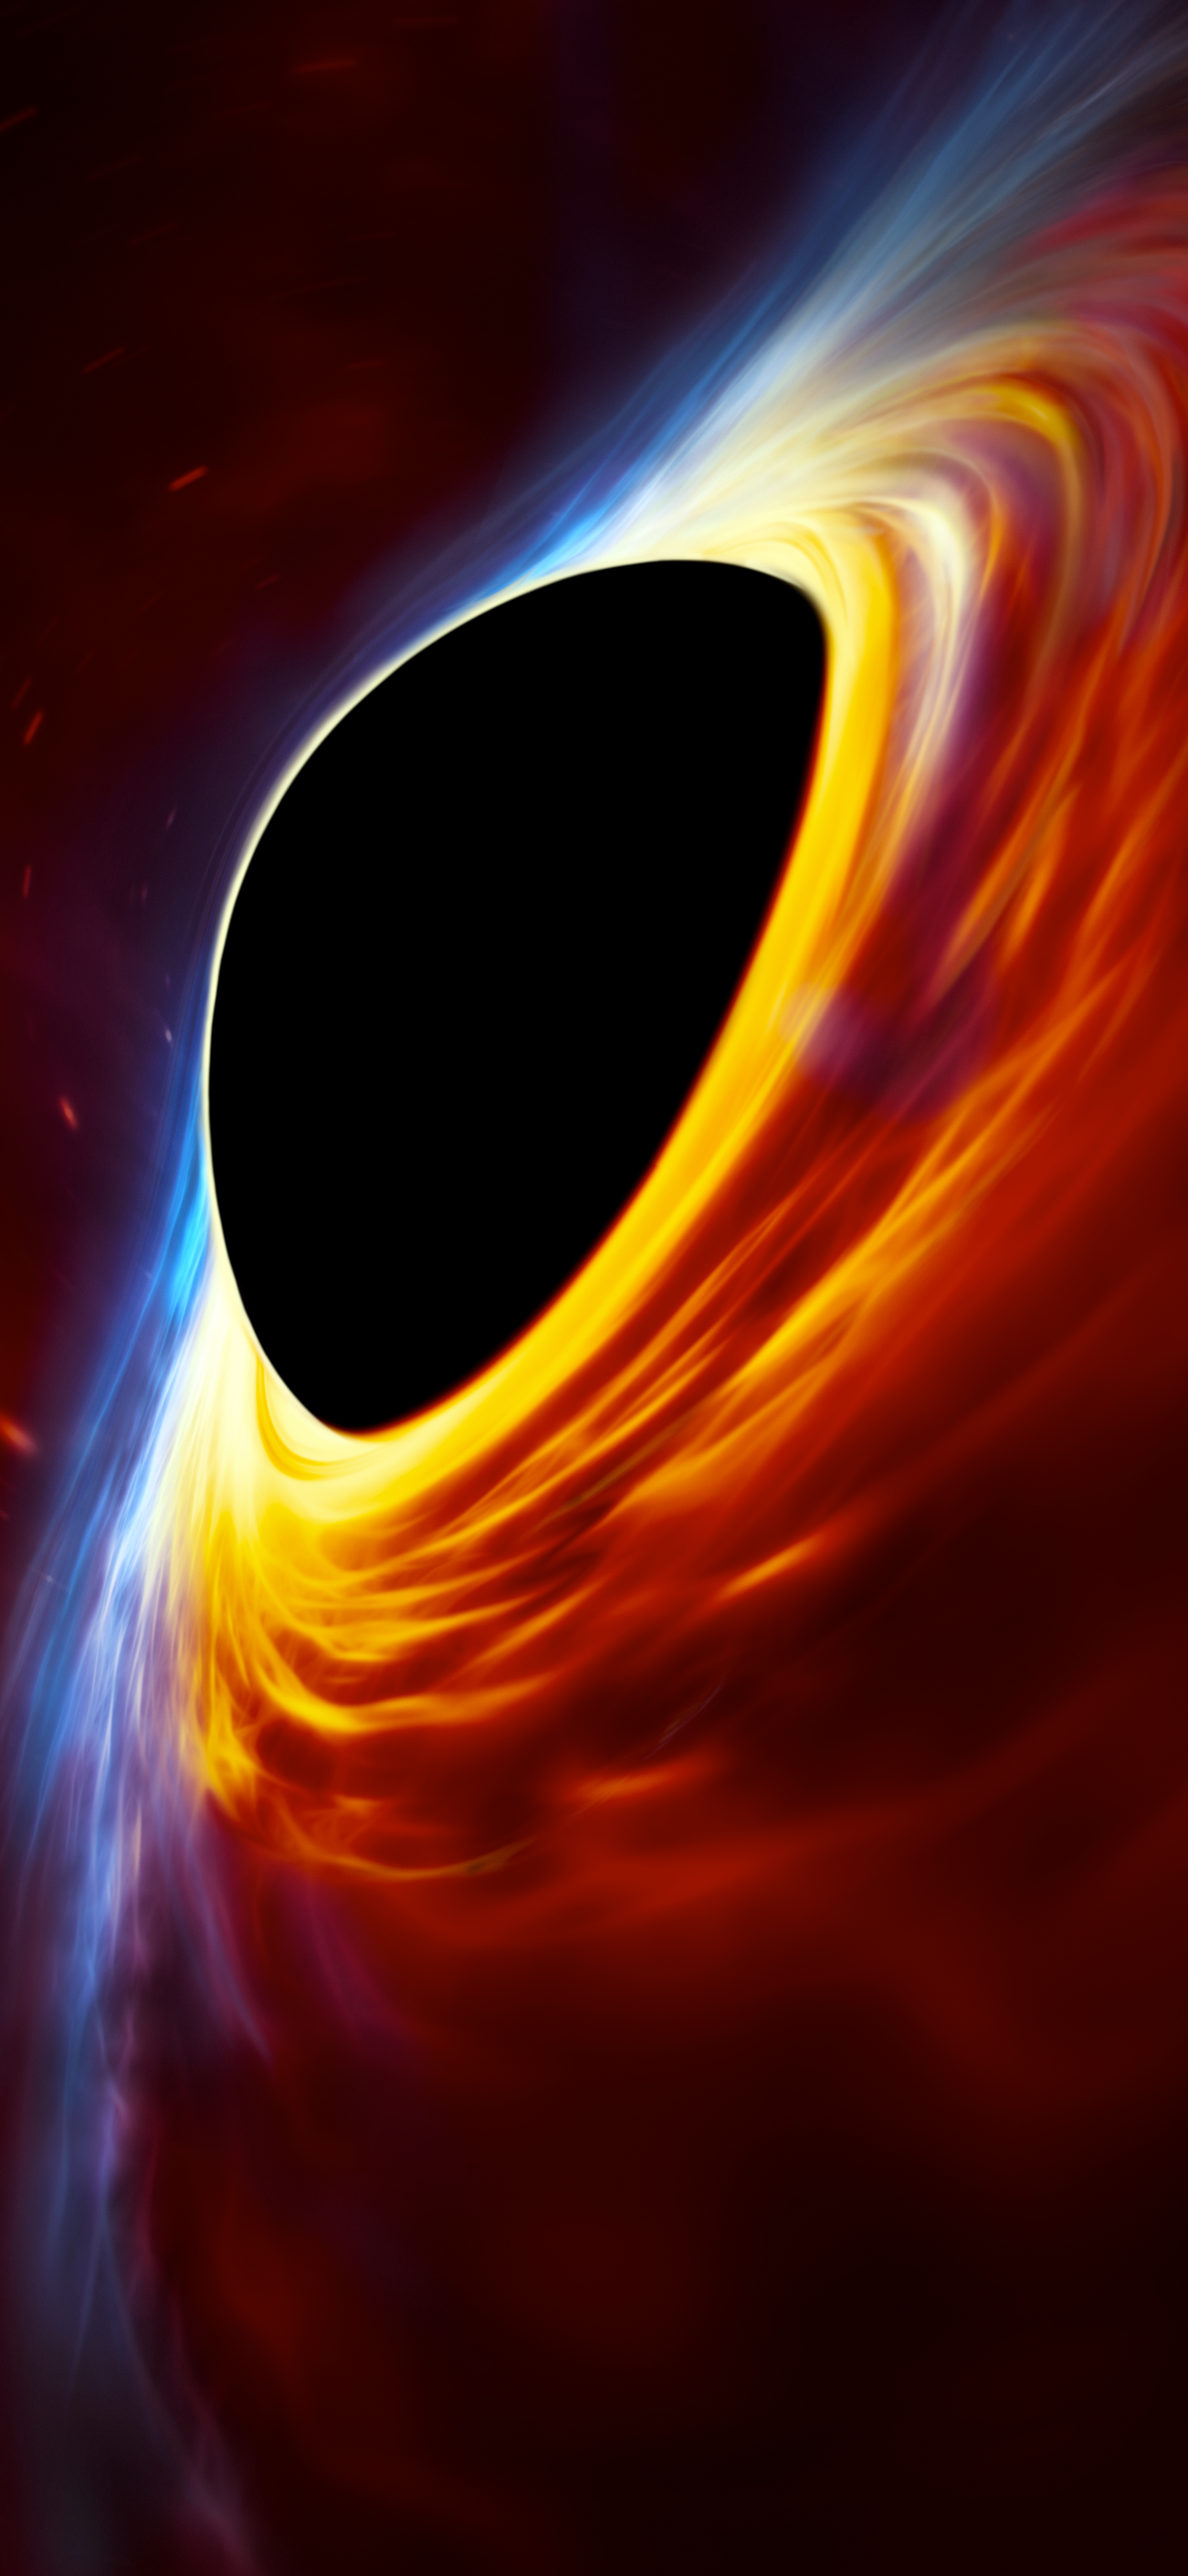 Sci Fi Black Hole Planet Wallpapers